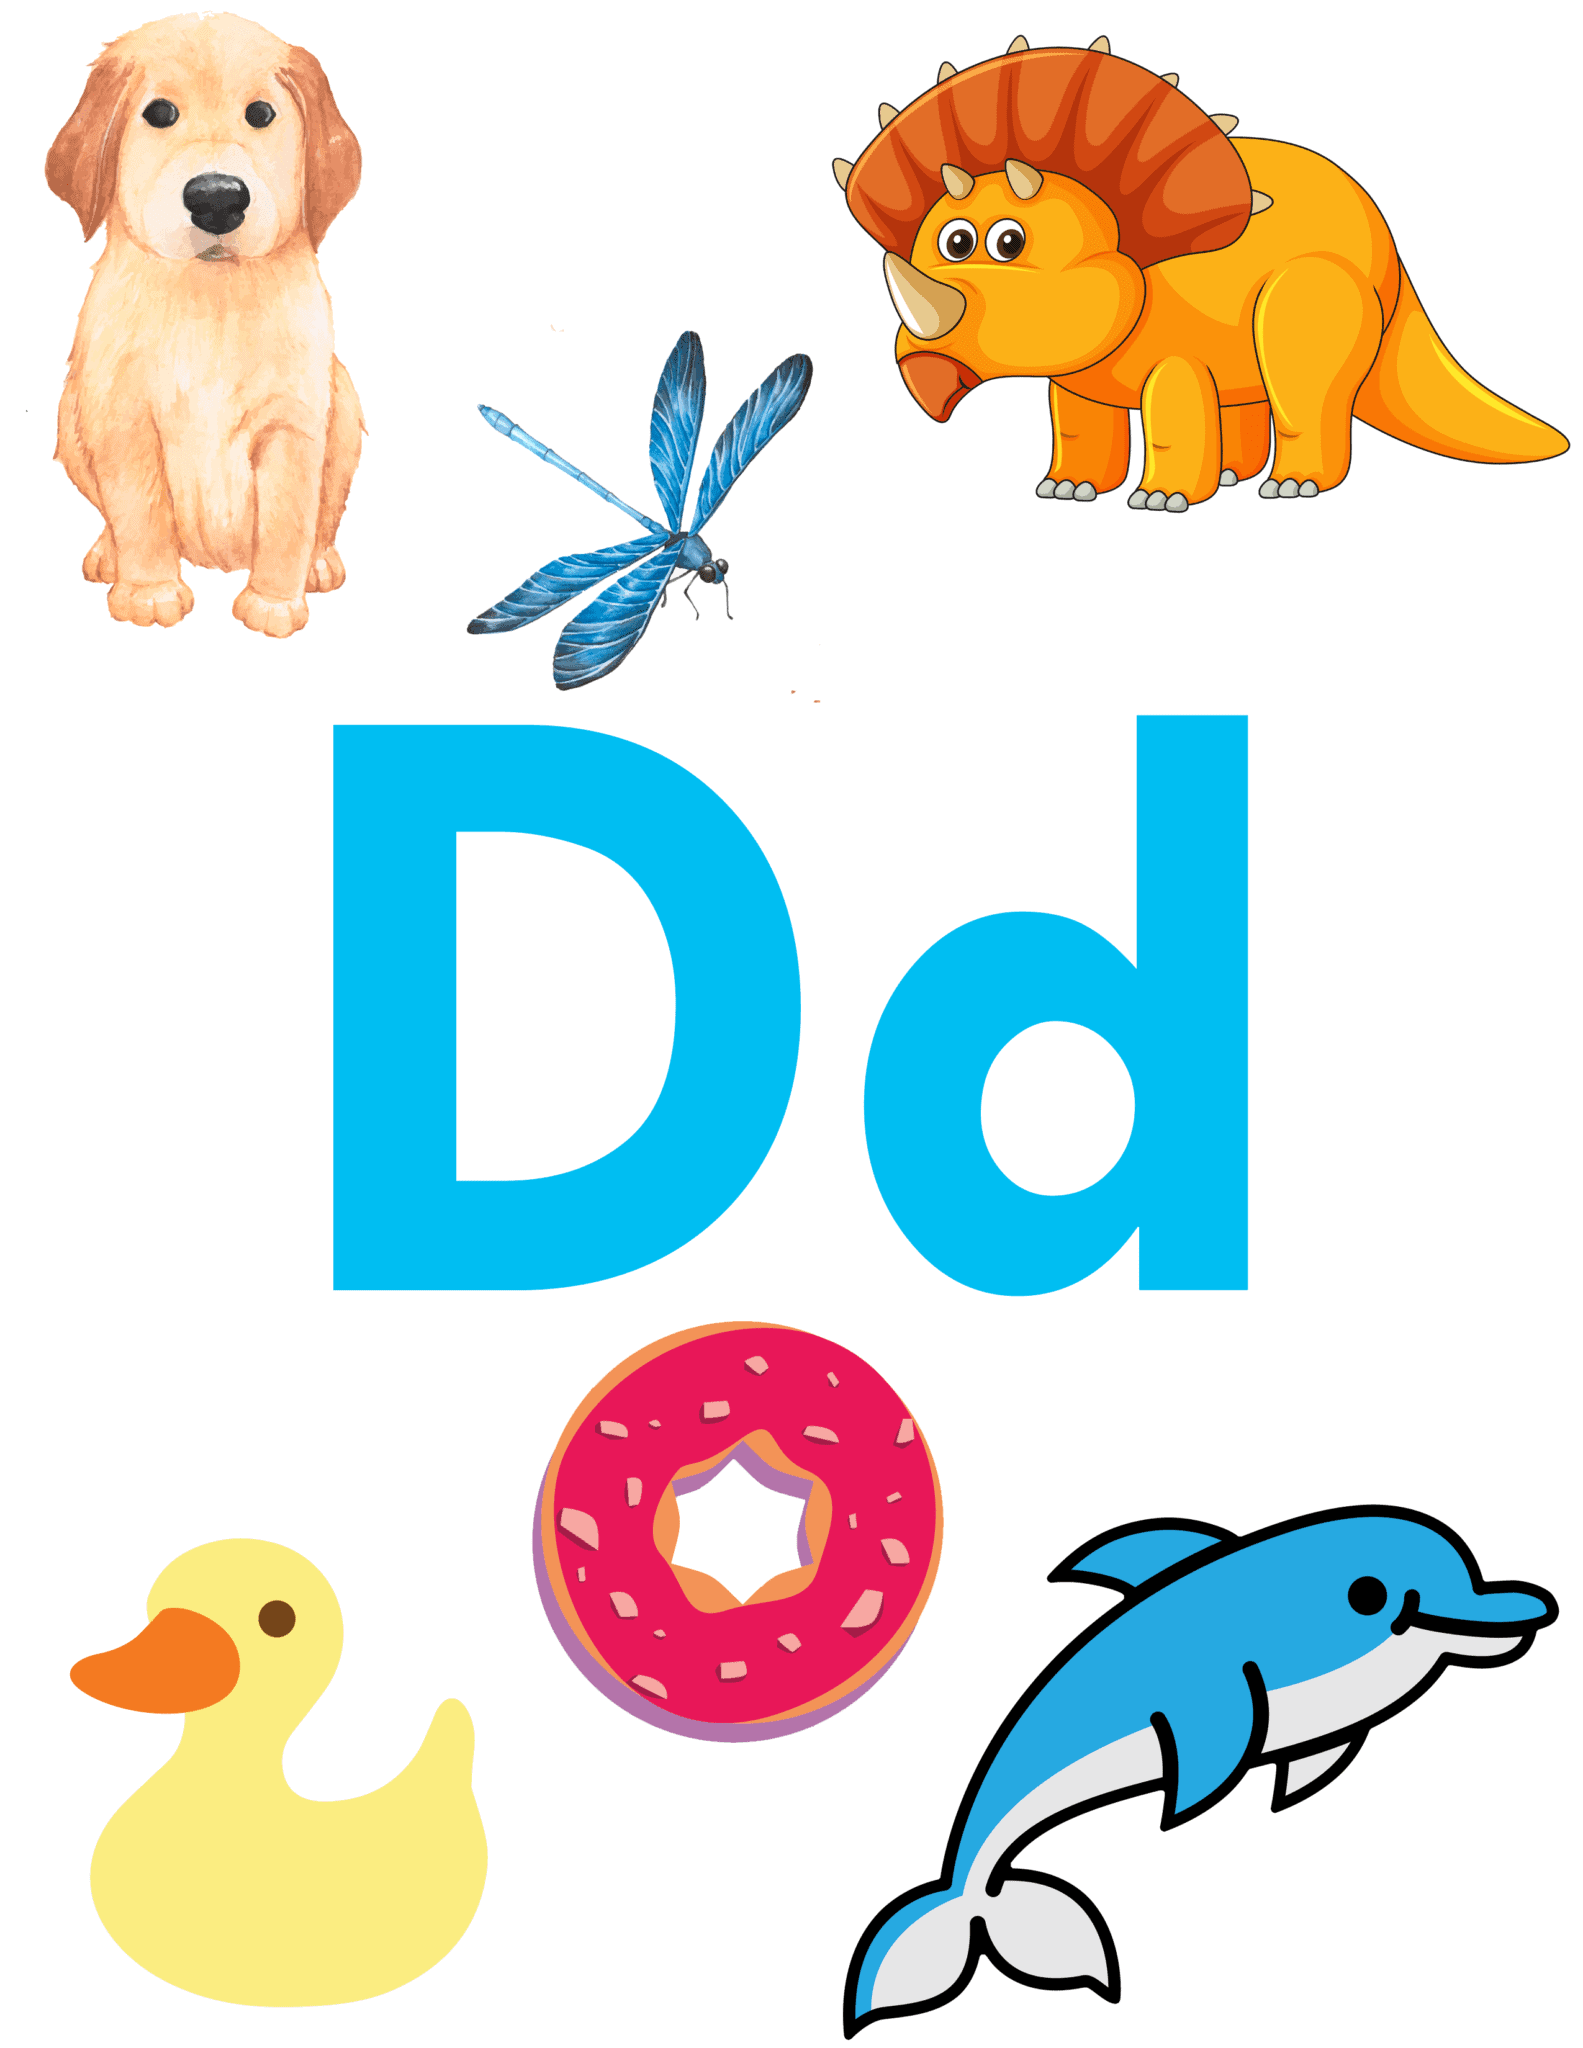 LETTER D ACTIVITIES & CRAFTS FOR PRESCHOOLERS TEMPLATE A Crafty Life